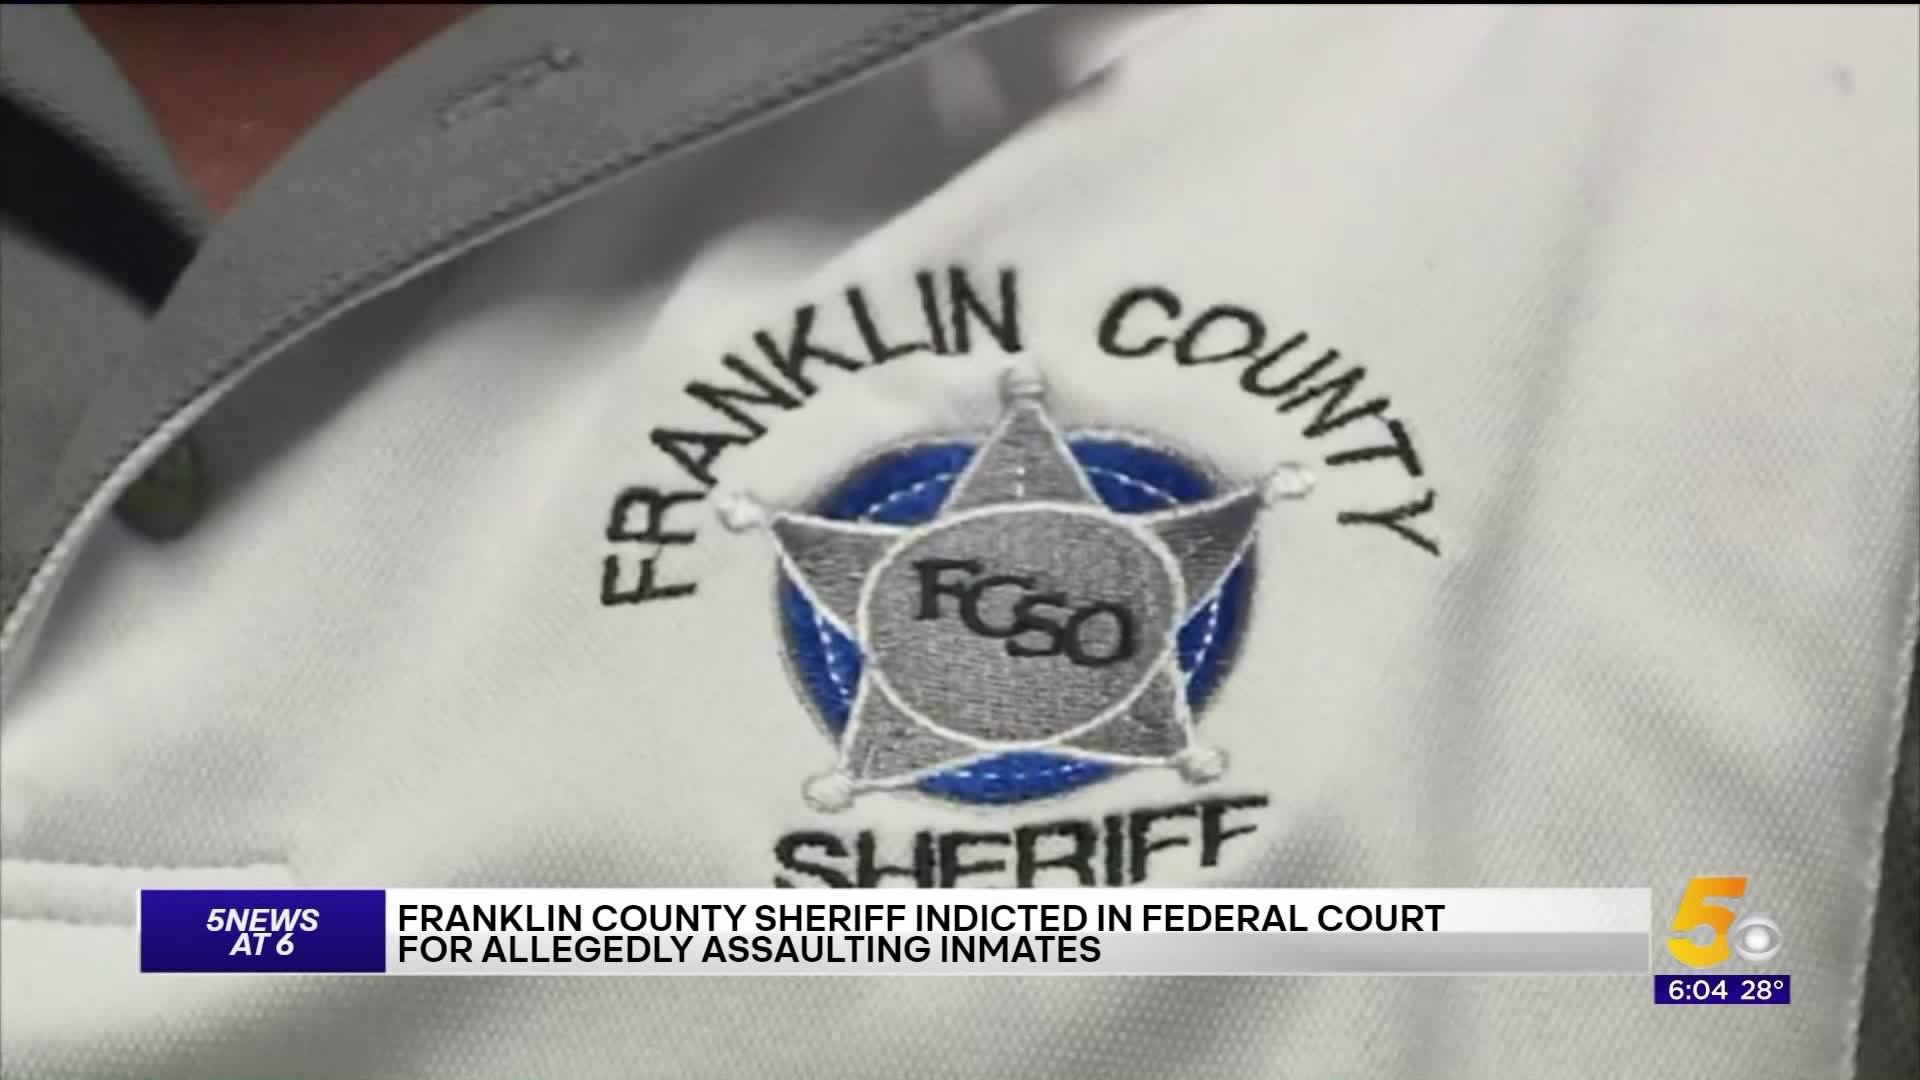 Franklin County Sheriff Indicted For Federal Civil Rights Offenses